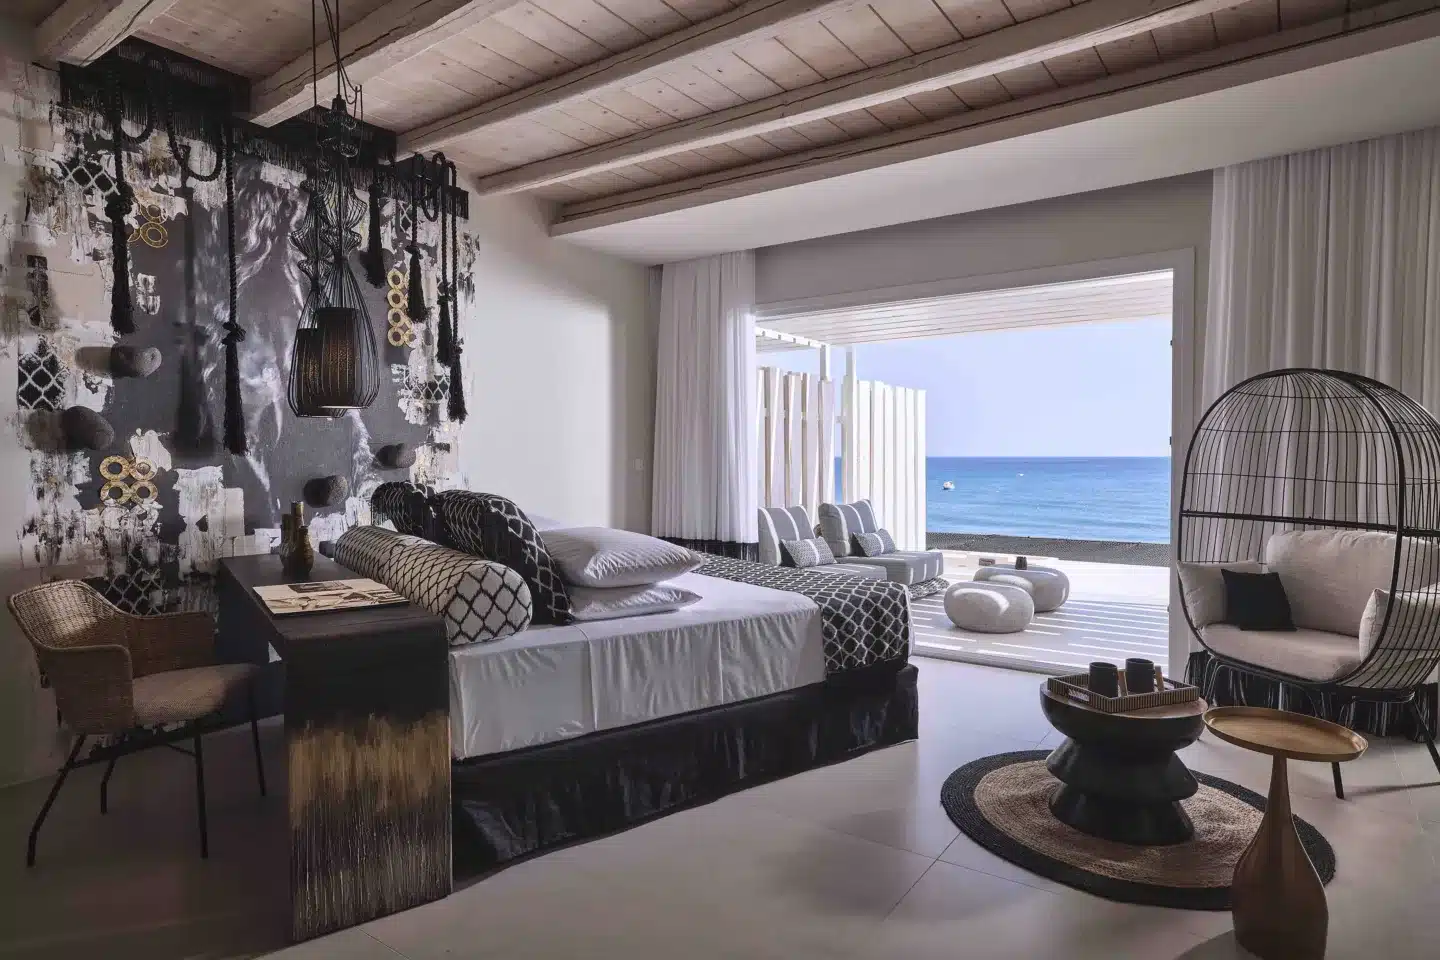 A luxurious room with a chic, modern interior design, featuring a unique wall art installation, elegant furniture, and large windows offering an unobstructed view of the serene blue sea, harmonizing contemporary style with natural beauty.